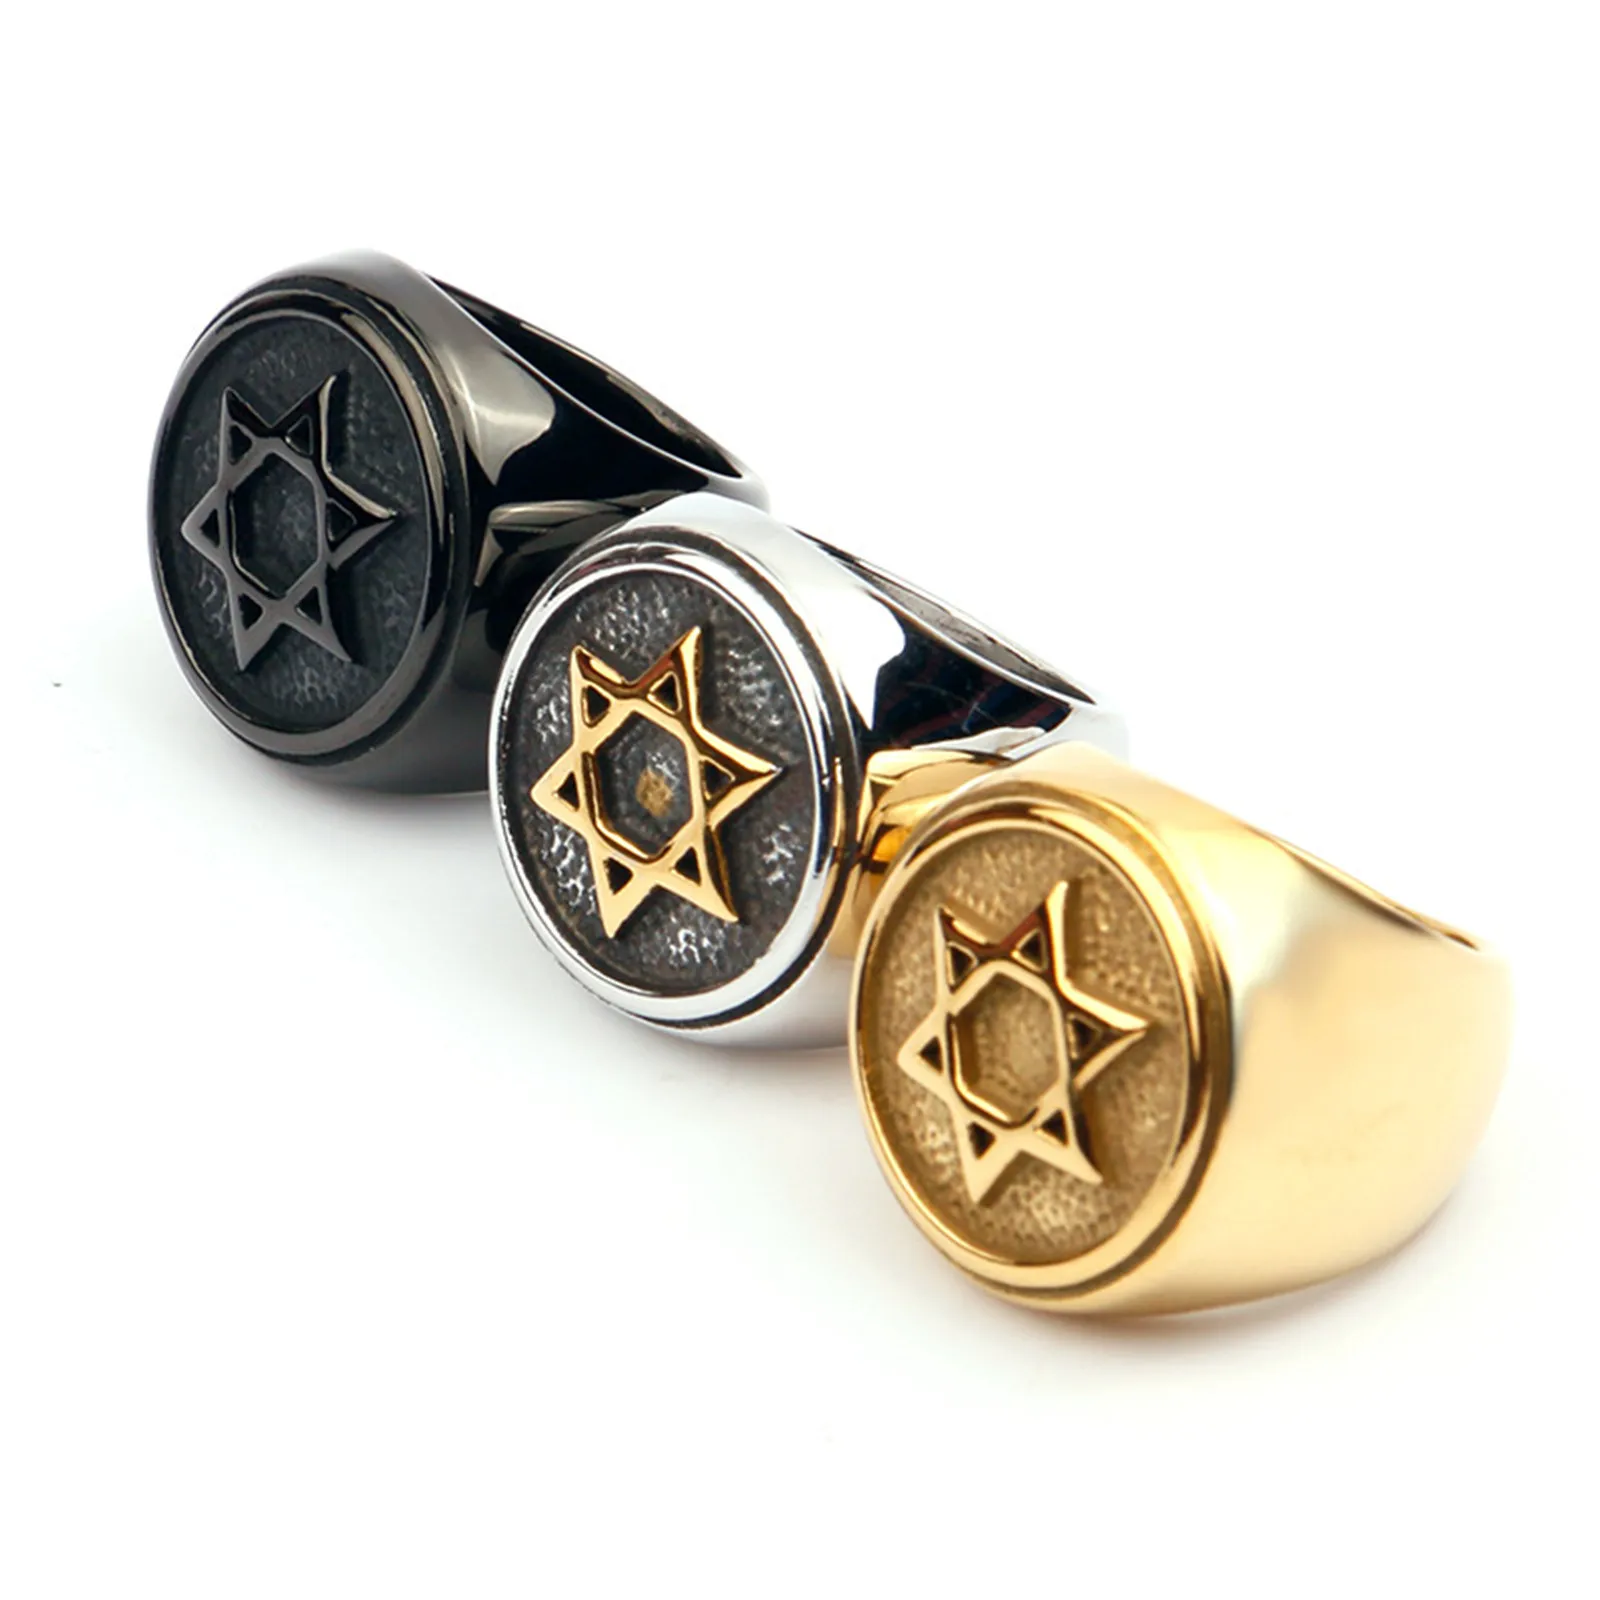 Gold Color Magen David Ring for Men Women Stainless Steel Jewish Judaism Religious Jewelry Solomon Seal Hexagram Star of Israel